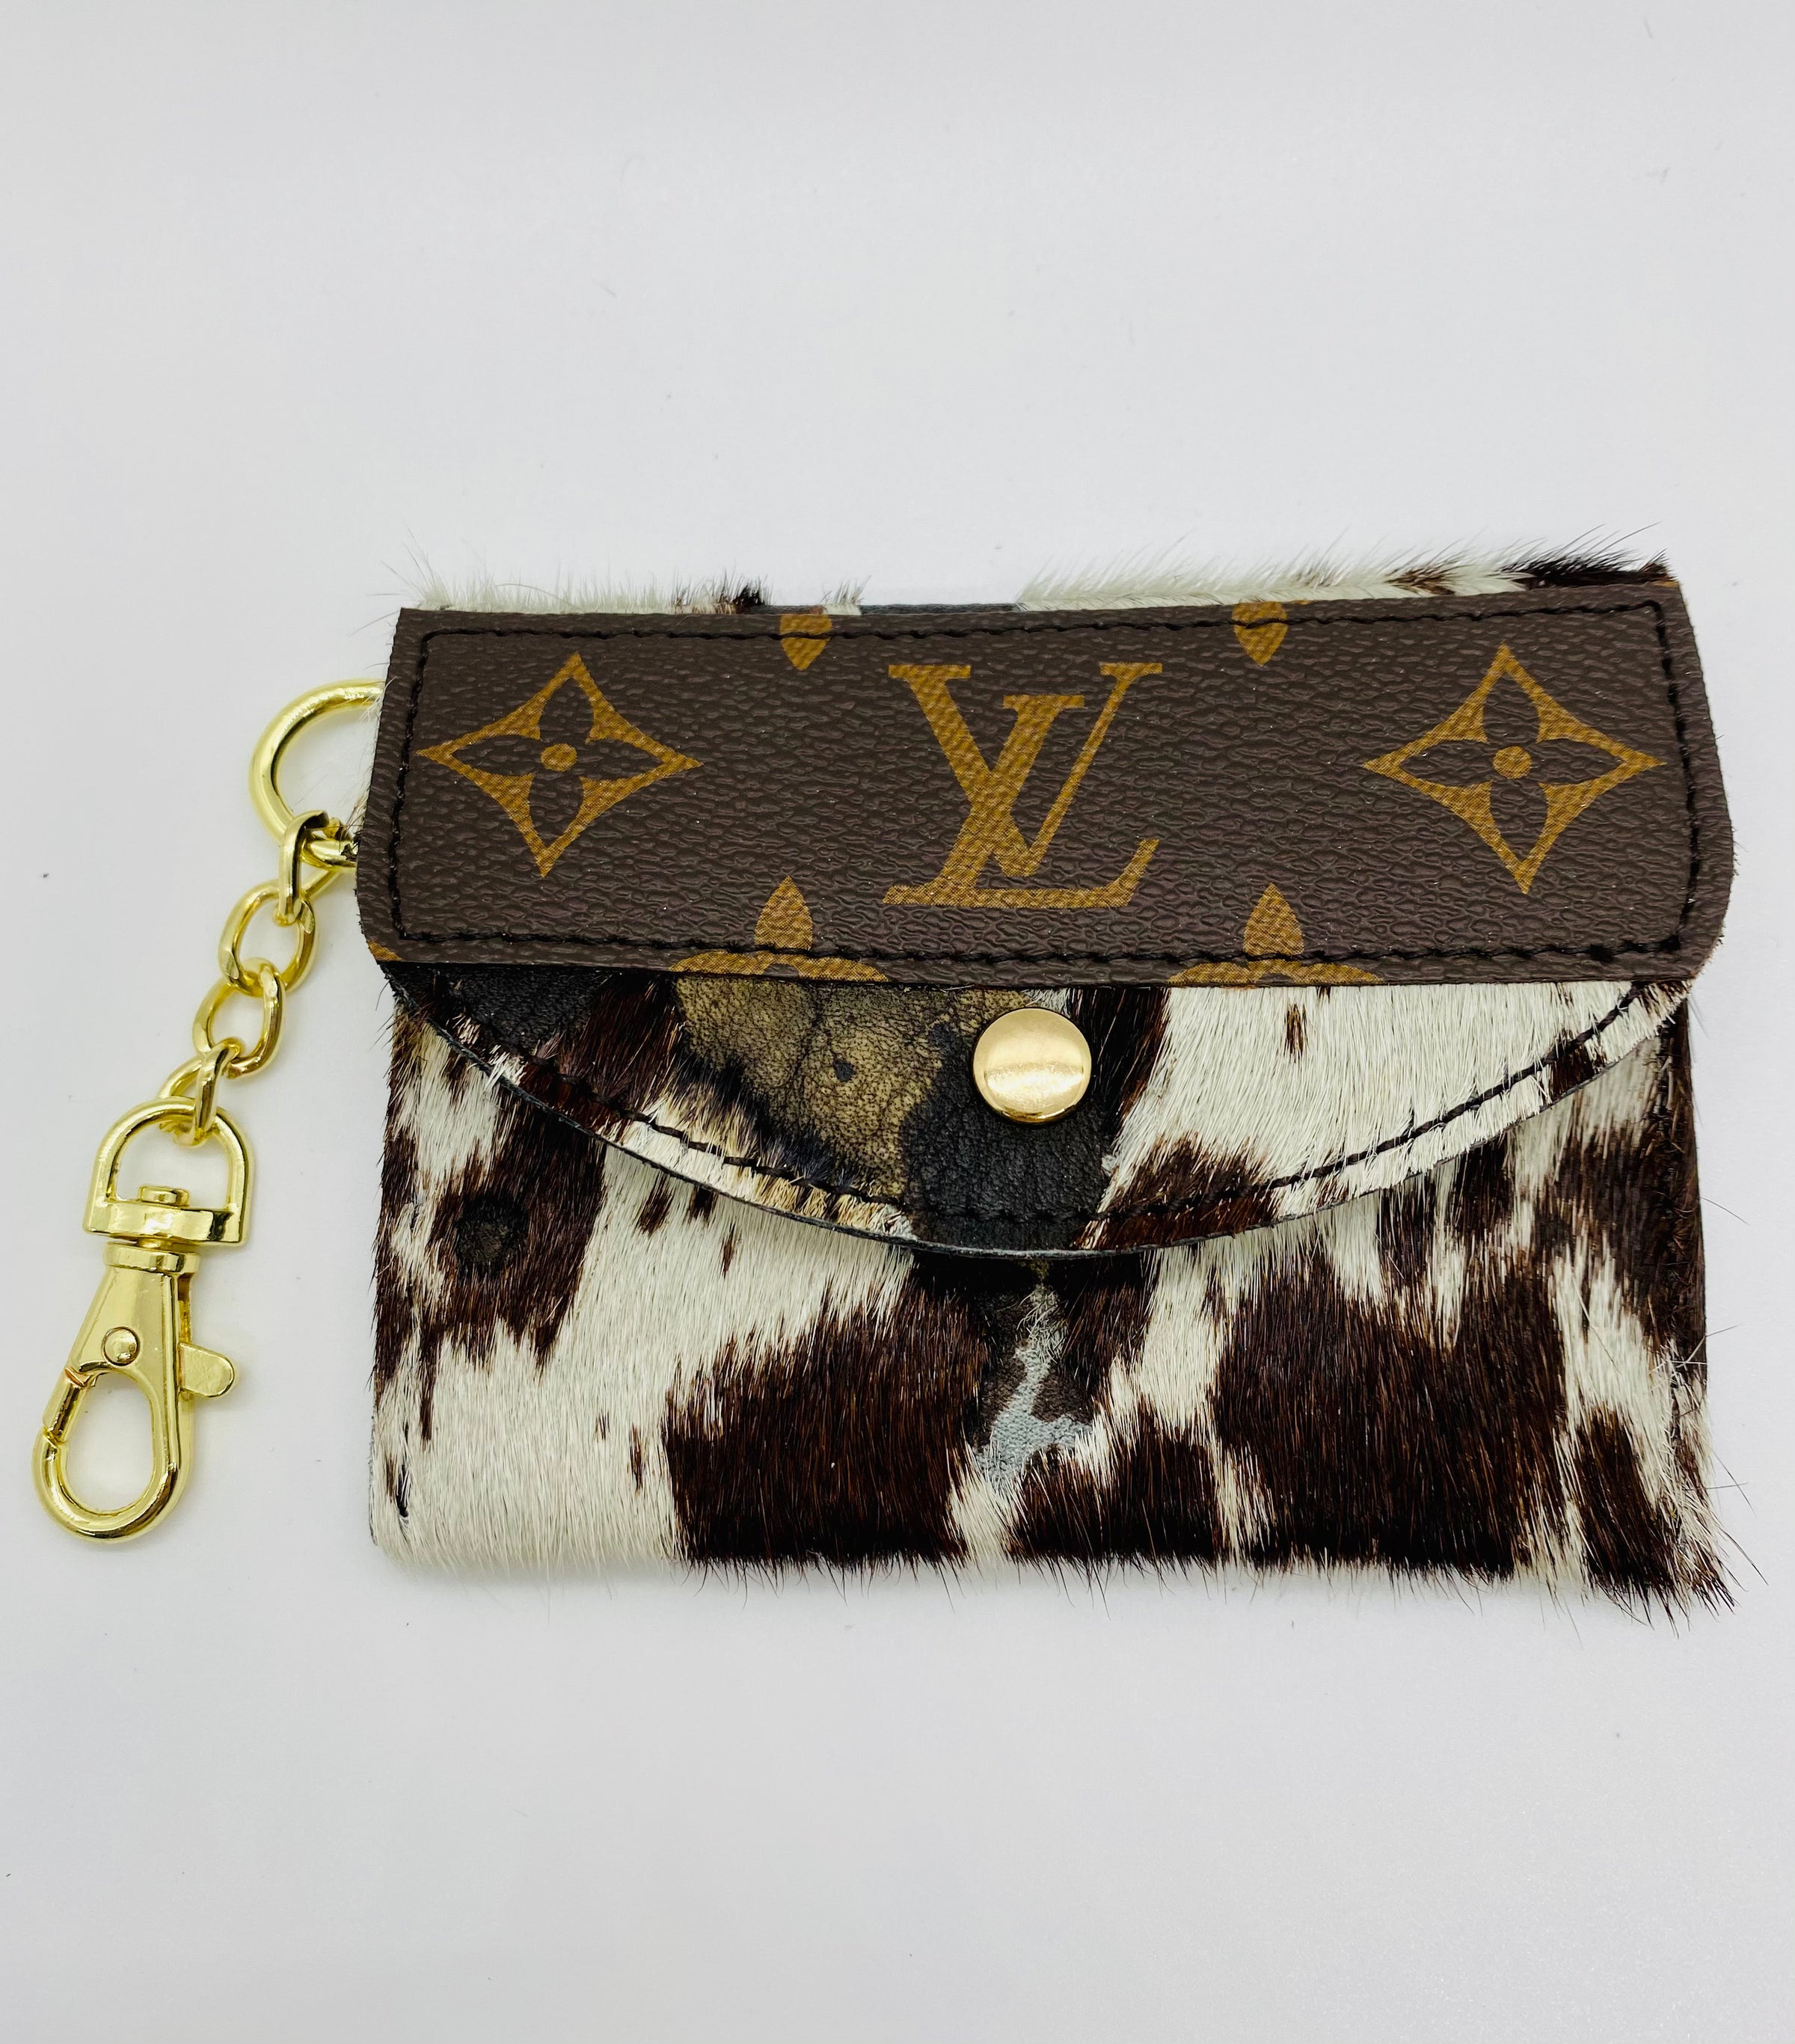 Upcycled Louis Vuitton keychain cardholder purse earrings hat